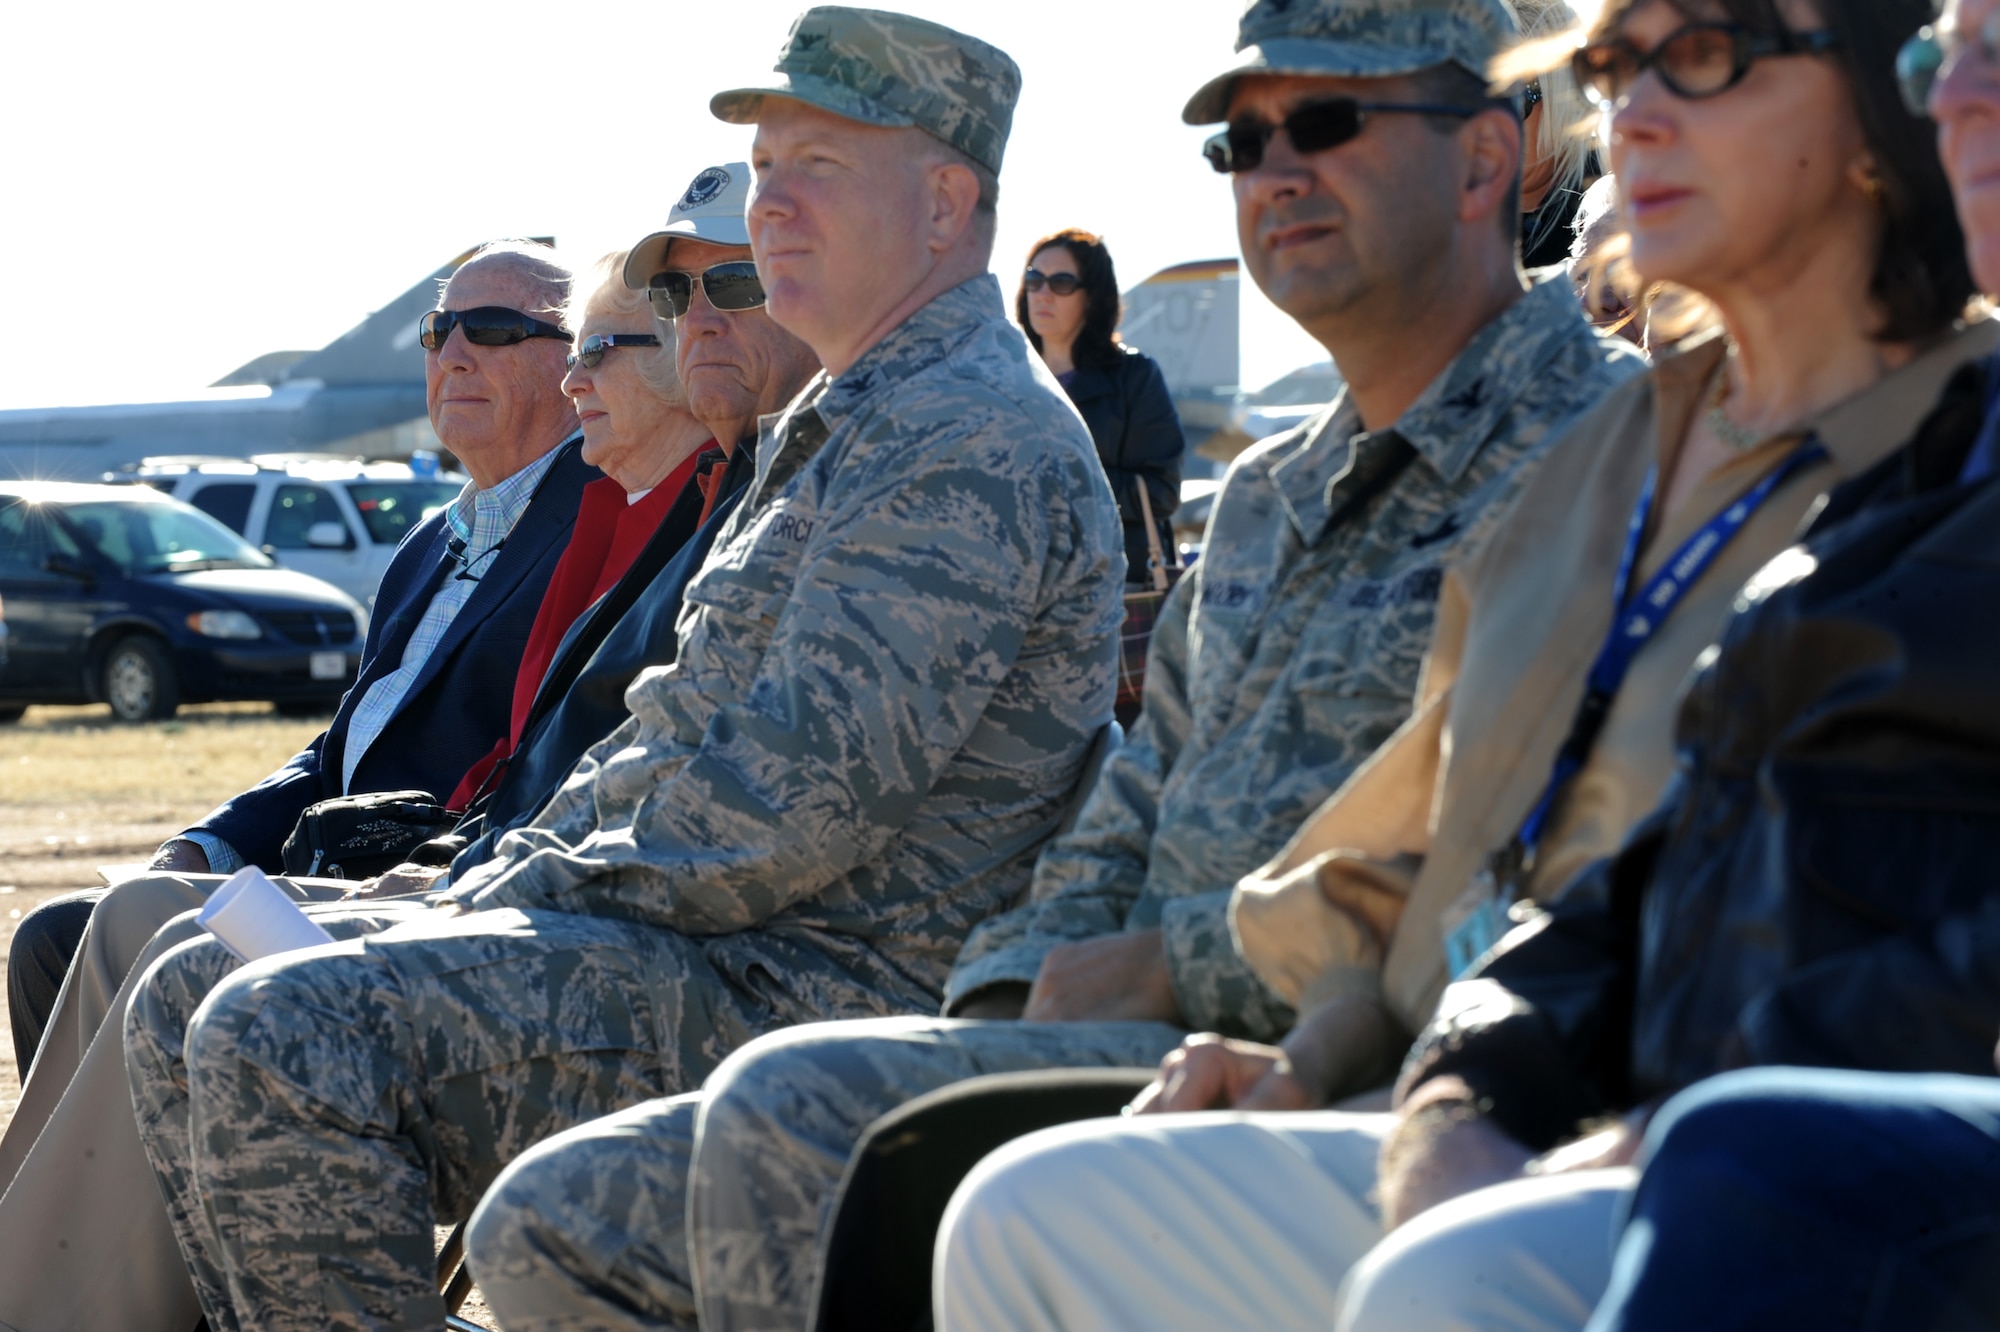 Retired U.S. Air Force General Earl O'Loughlin, left, watches as a B-52G is cut into pieces at the 309th Aerospace Maintenance and Regeneration Group, Davis-Monthan Air Force Base, Ariz., Dec. 19, 2013. O'Loughlin was a B-25 Instructor pilot from 1965 -1968 for the 379th  Bombardment Wing at Wurtsmith Air Force Base, Mich., which is now decommissioned. (U.S Air Force photo by Staff Sgt. Angela Ruiz/released)